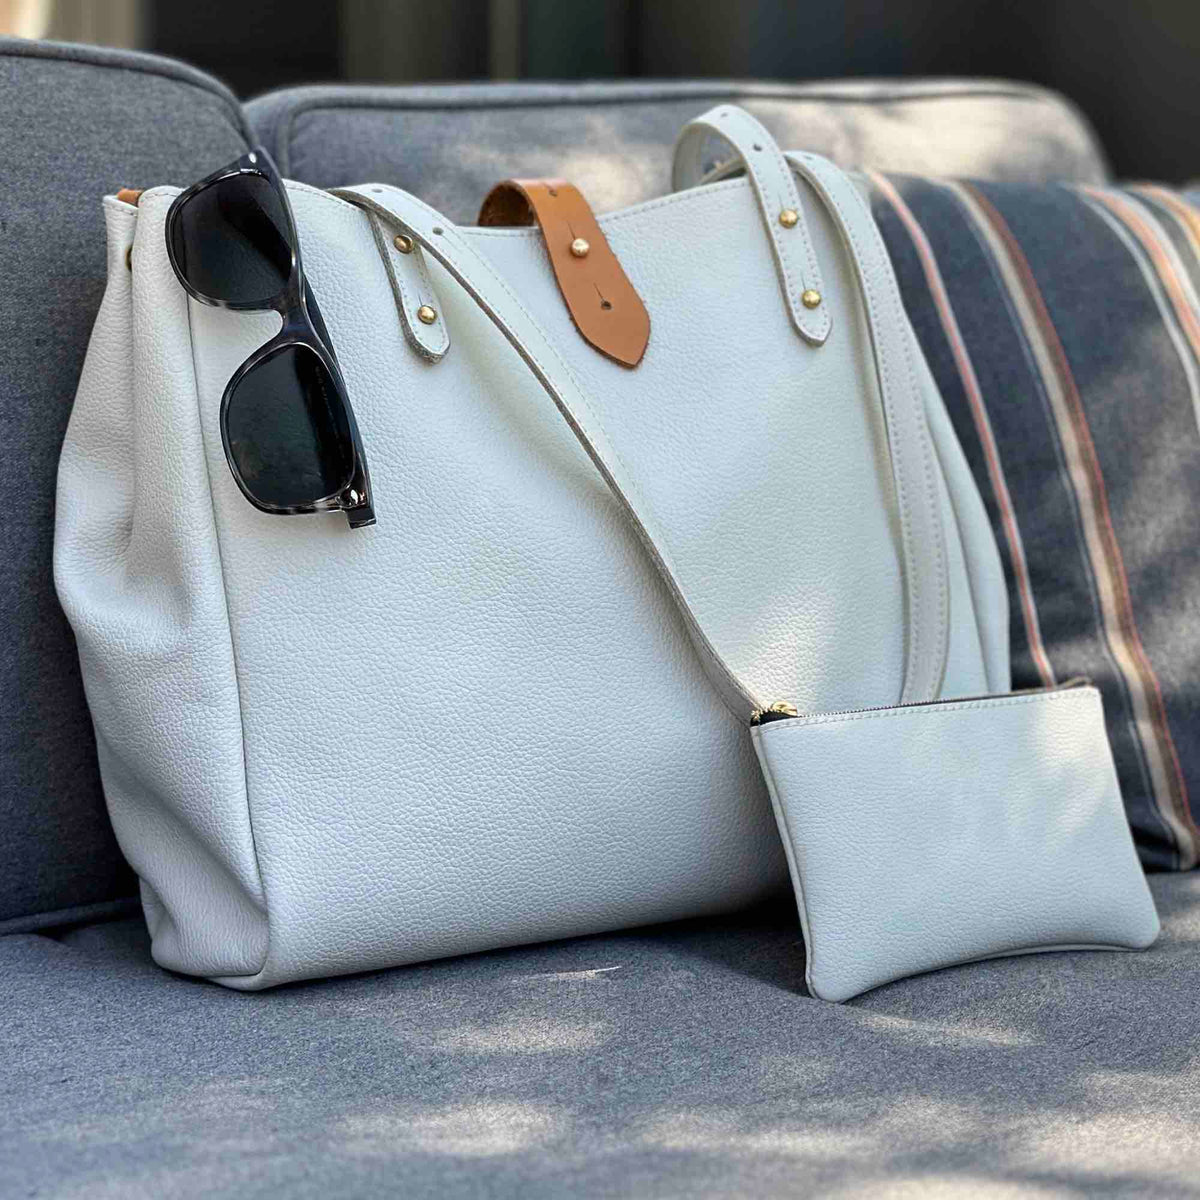 Oberon Design Zipper Pouch and Sonoma Tote with Pacific Leather in Fog